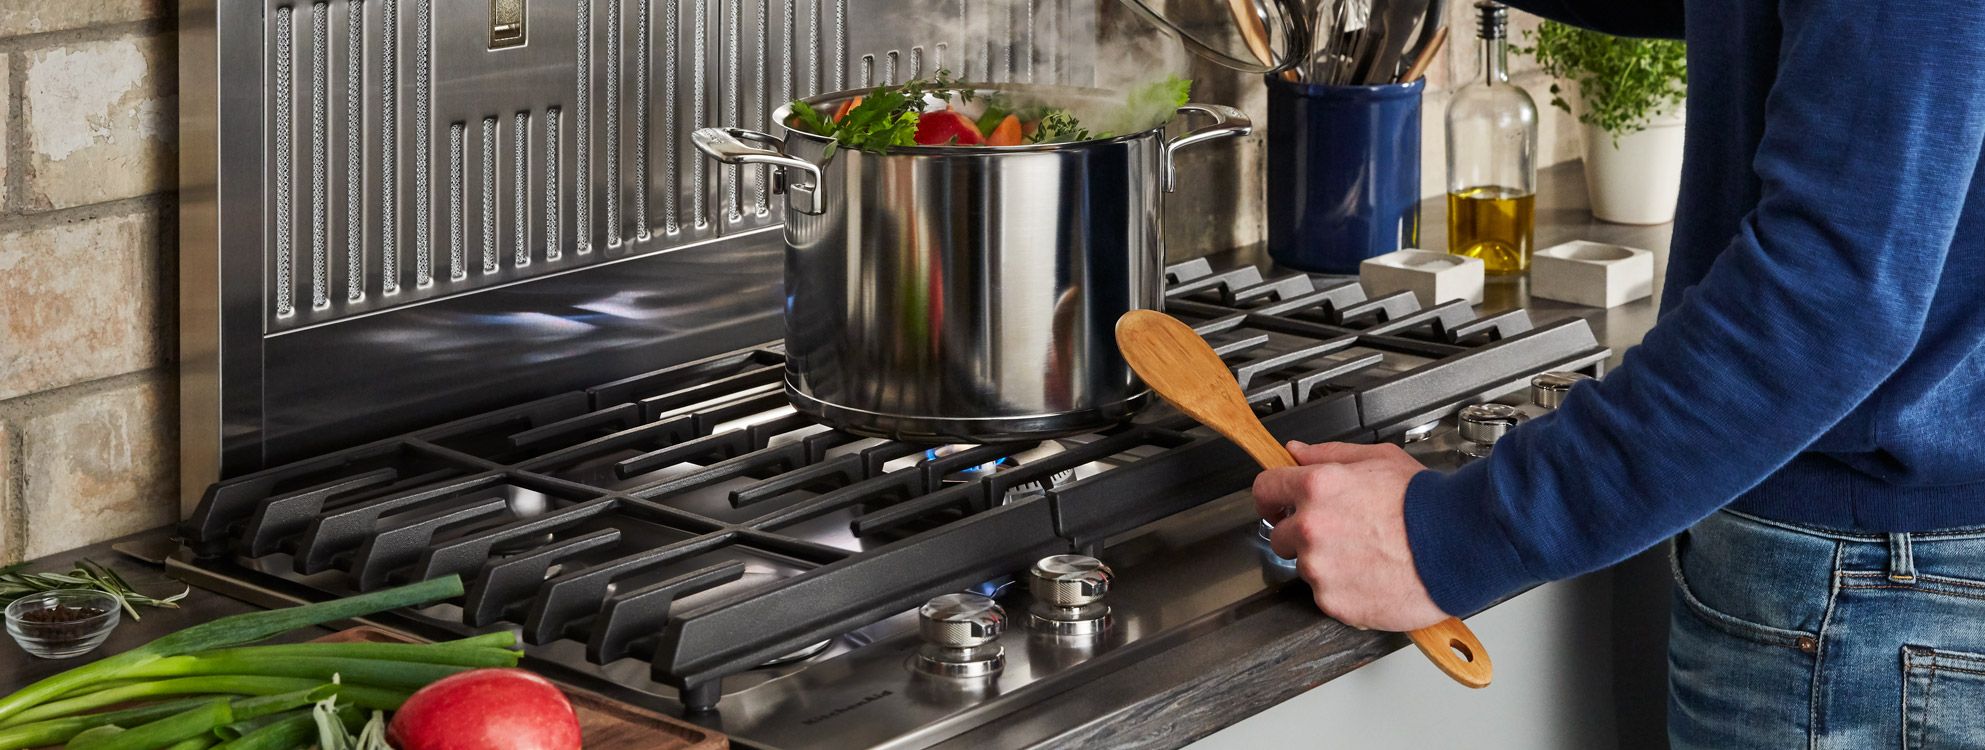 Man holding wooden spoon, boiling a pot of produce on a KitchenAid cooktop.